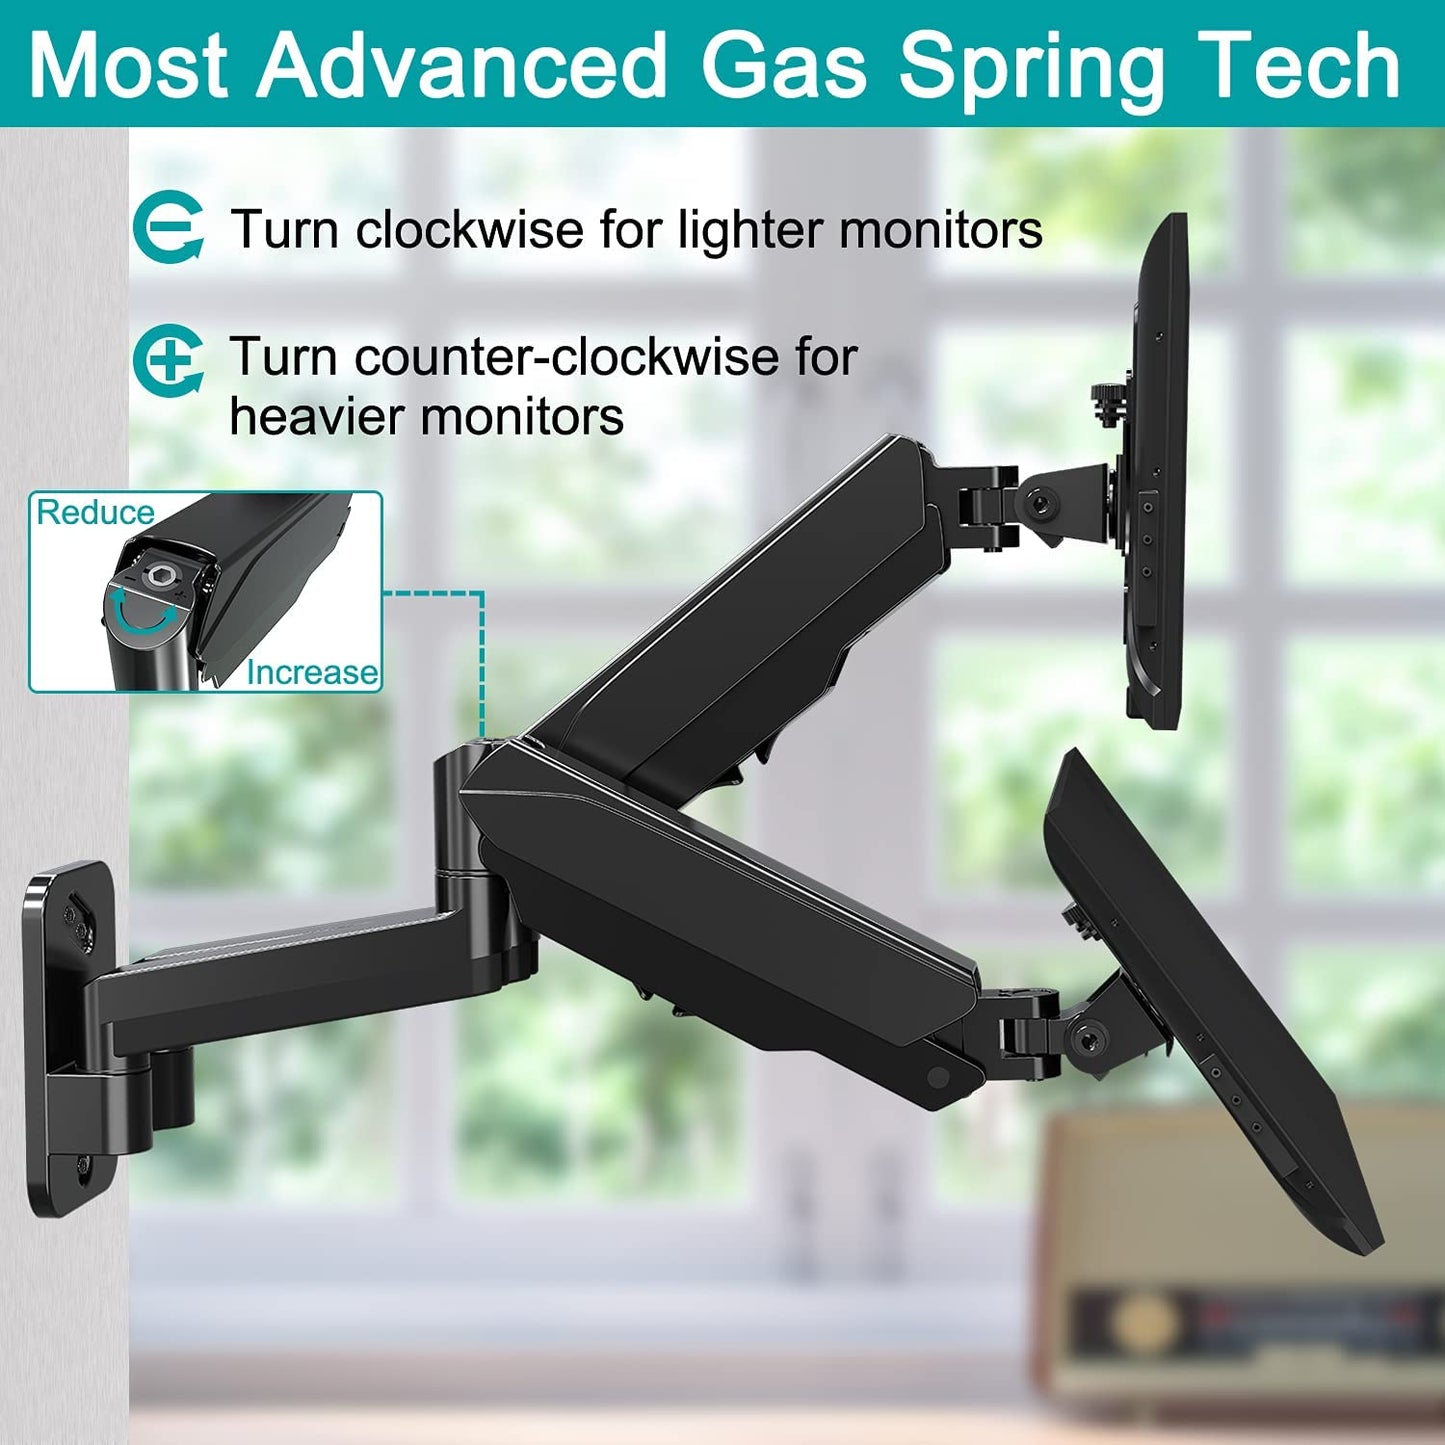 Dual Arms monitor wall mount with gas spring for easier adjustment